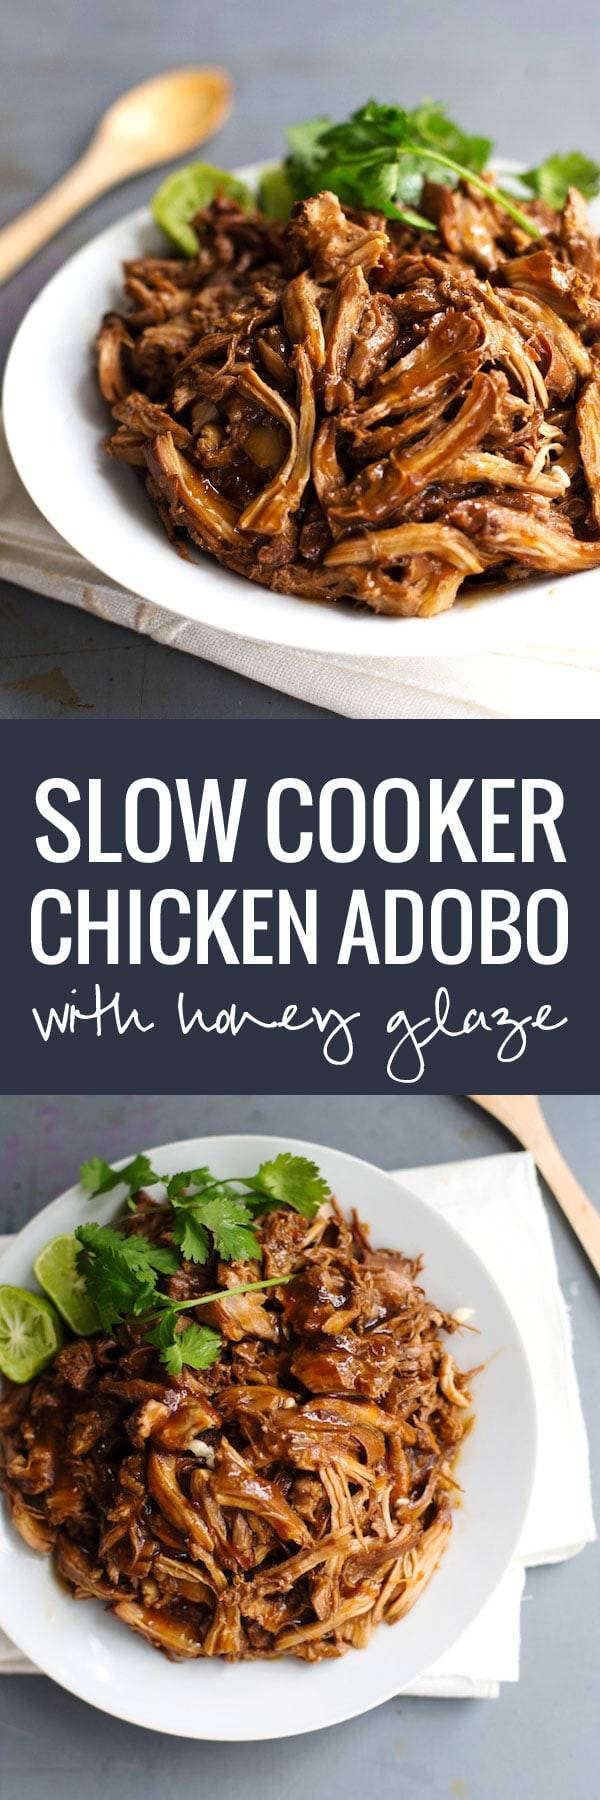 Honey Glazed Crockpot Chicken Adobo - simple pantry ingredients, hardly any hands-on time, 200 calories.